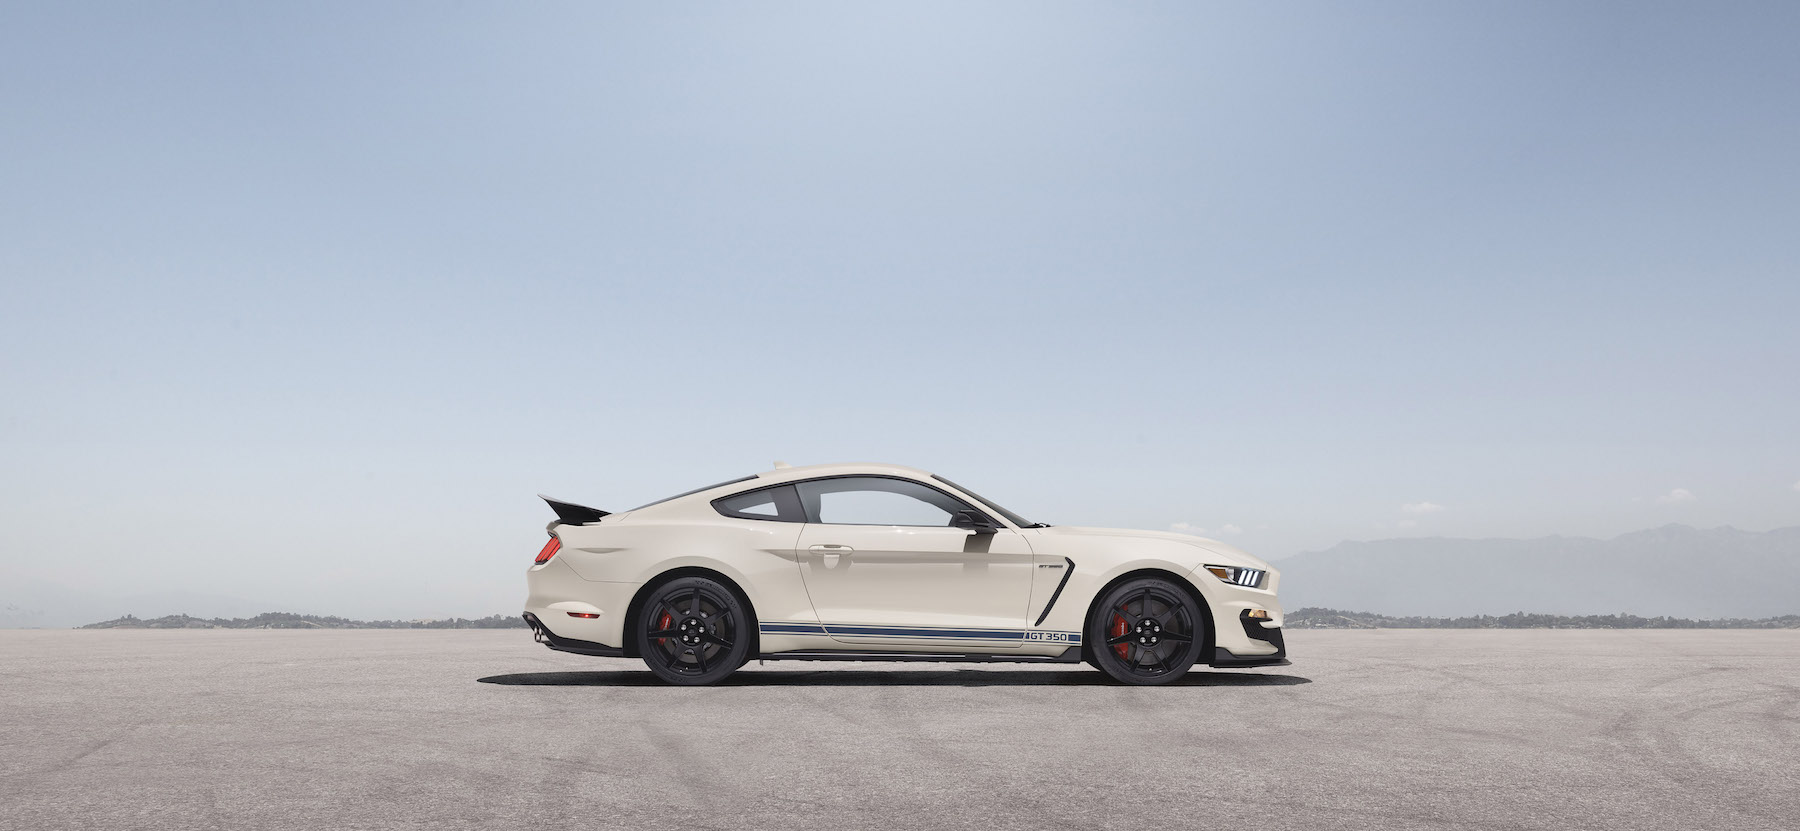 Heritage Edition Package available on 2020 Mustang Shelby GT350 and GT350R models features a unique throwback livery with Wimbledon White paint and Guardsman Blue side and over-the-top racing stripes